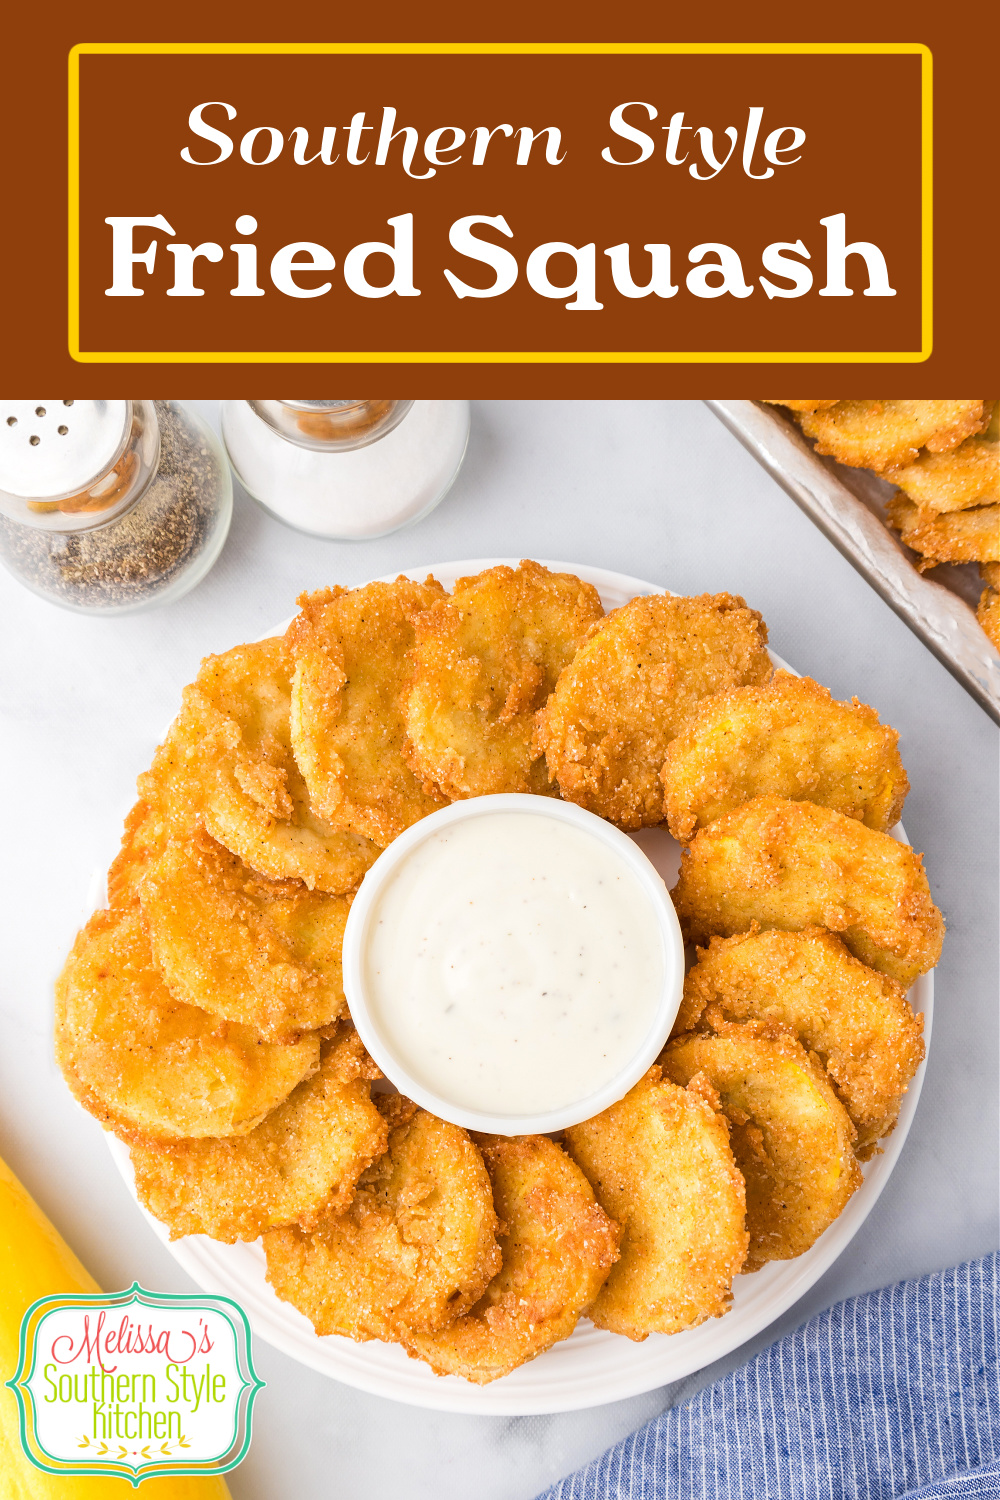 This Southern style Fried Squash can be served as a side dish or an appetizer with your favorite sauces or Ranch dressing for dipping. #friedsquash #squashrecipes #easyfriedsquash #southernstylesquash #cookedsquash #yellowsquash #summersquashrecipes via @melissasssk